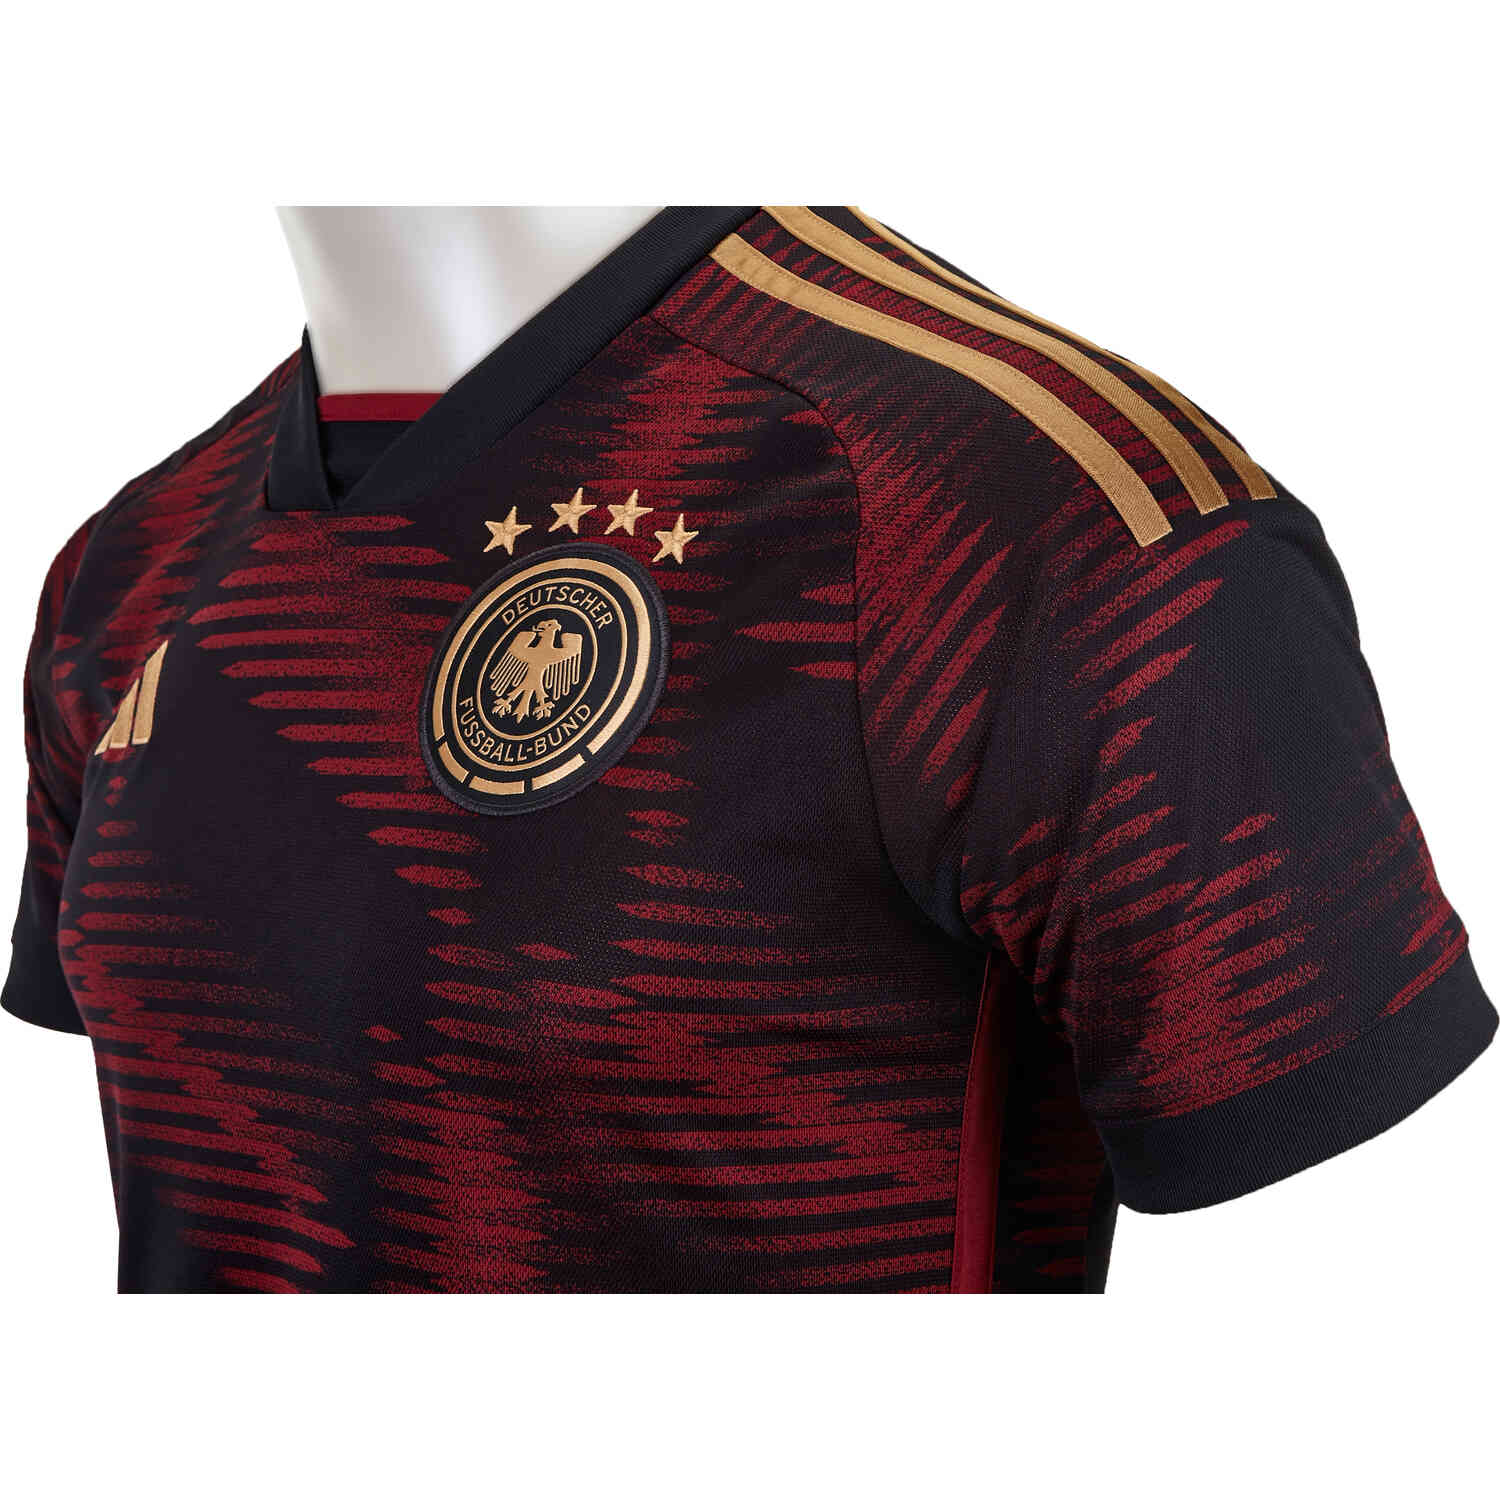  adidas Men's Soccer Germany Away Jersey (Small) EQT